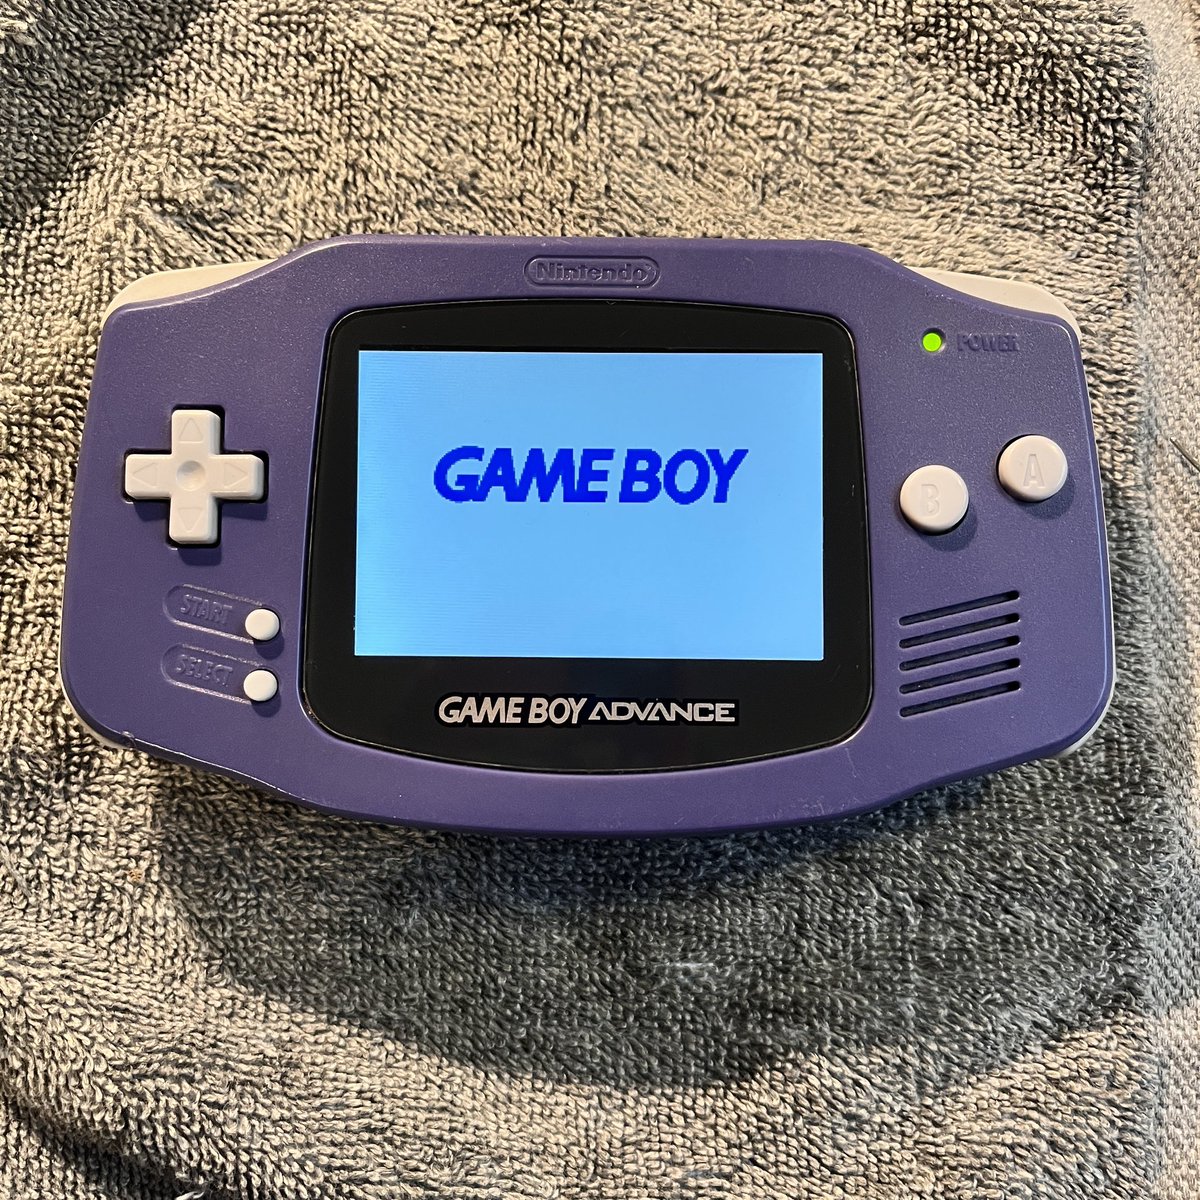 life is nothing but a game boy🦩
^
^^
^^^
^^^^
#heady #kush #lofi #vibes #stompbox  #sp303 #vaporwave #aesthetic #ambient #af #sp404 #gameboy #synth #guitarpedals #cassette #synthesizer #synthwave #retrowave #gameboyadvance #chiptune #nanoloop #pedalboard #lsdj #dreampop #synth